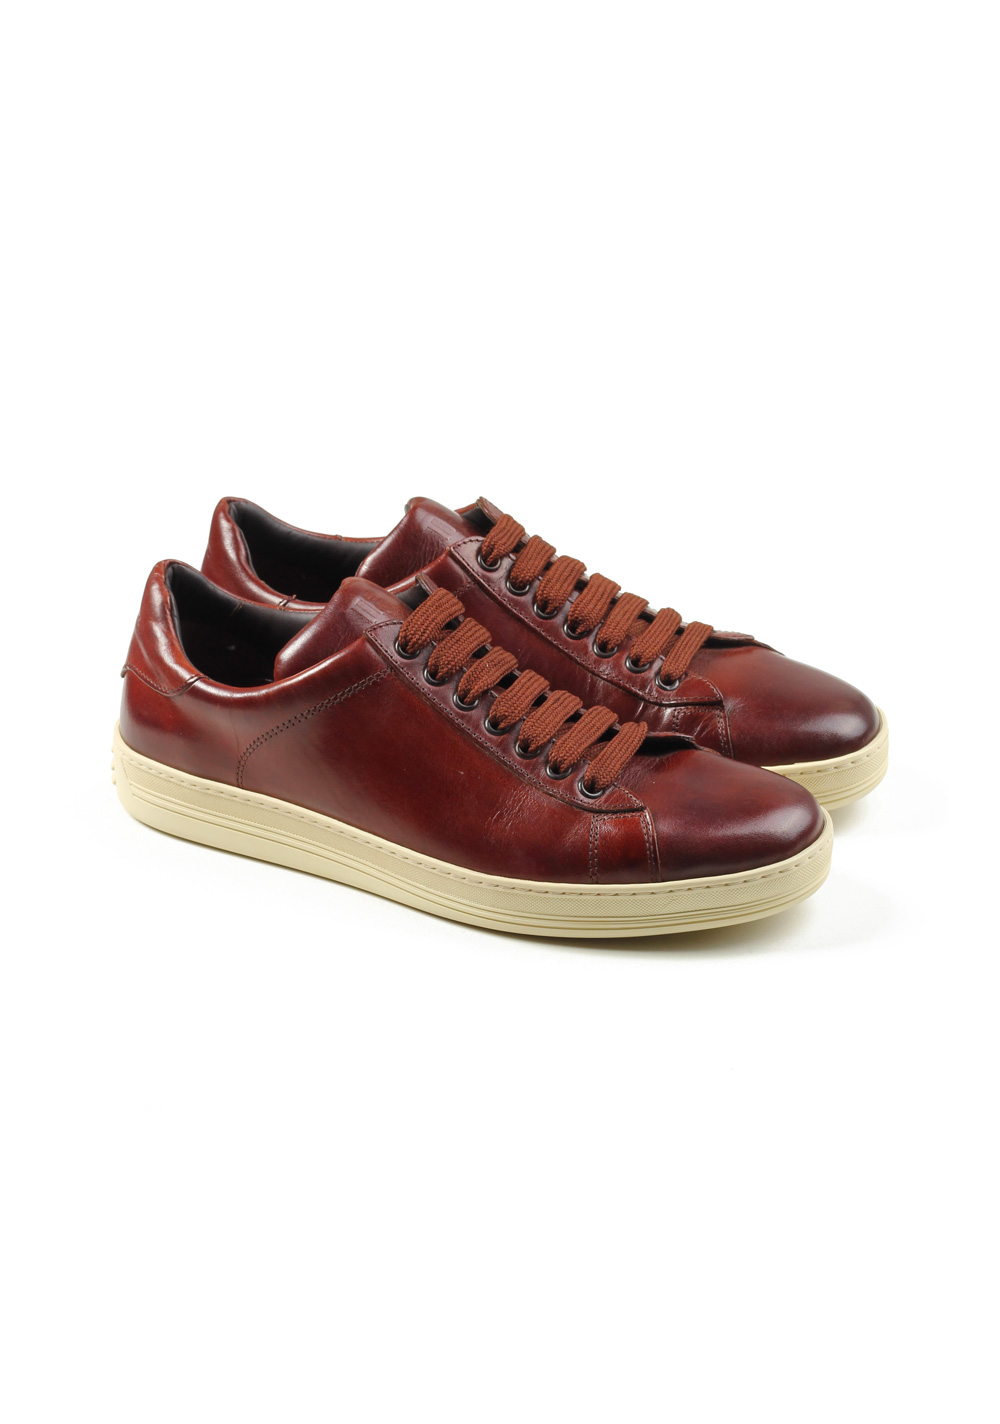 TOM FORD Russel Low Top Brown Leather Sneaker Shoes Size 10 UK / 11 U.S. | Costume Limité